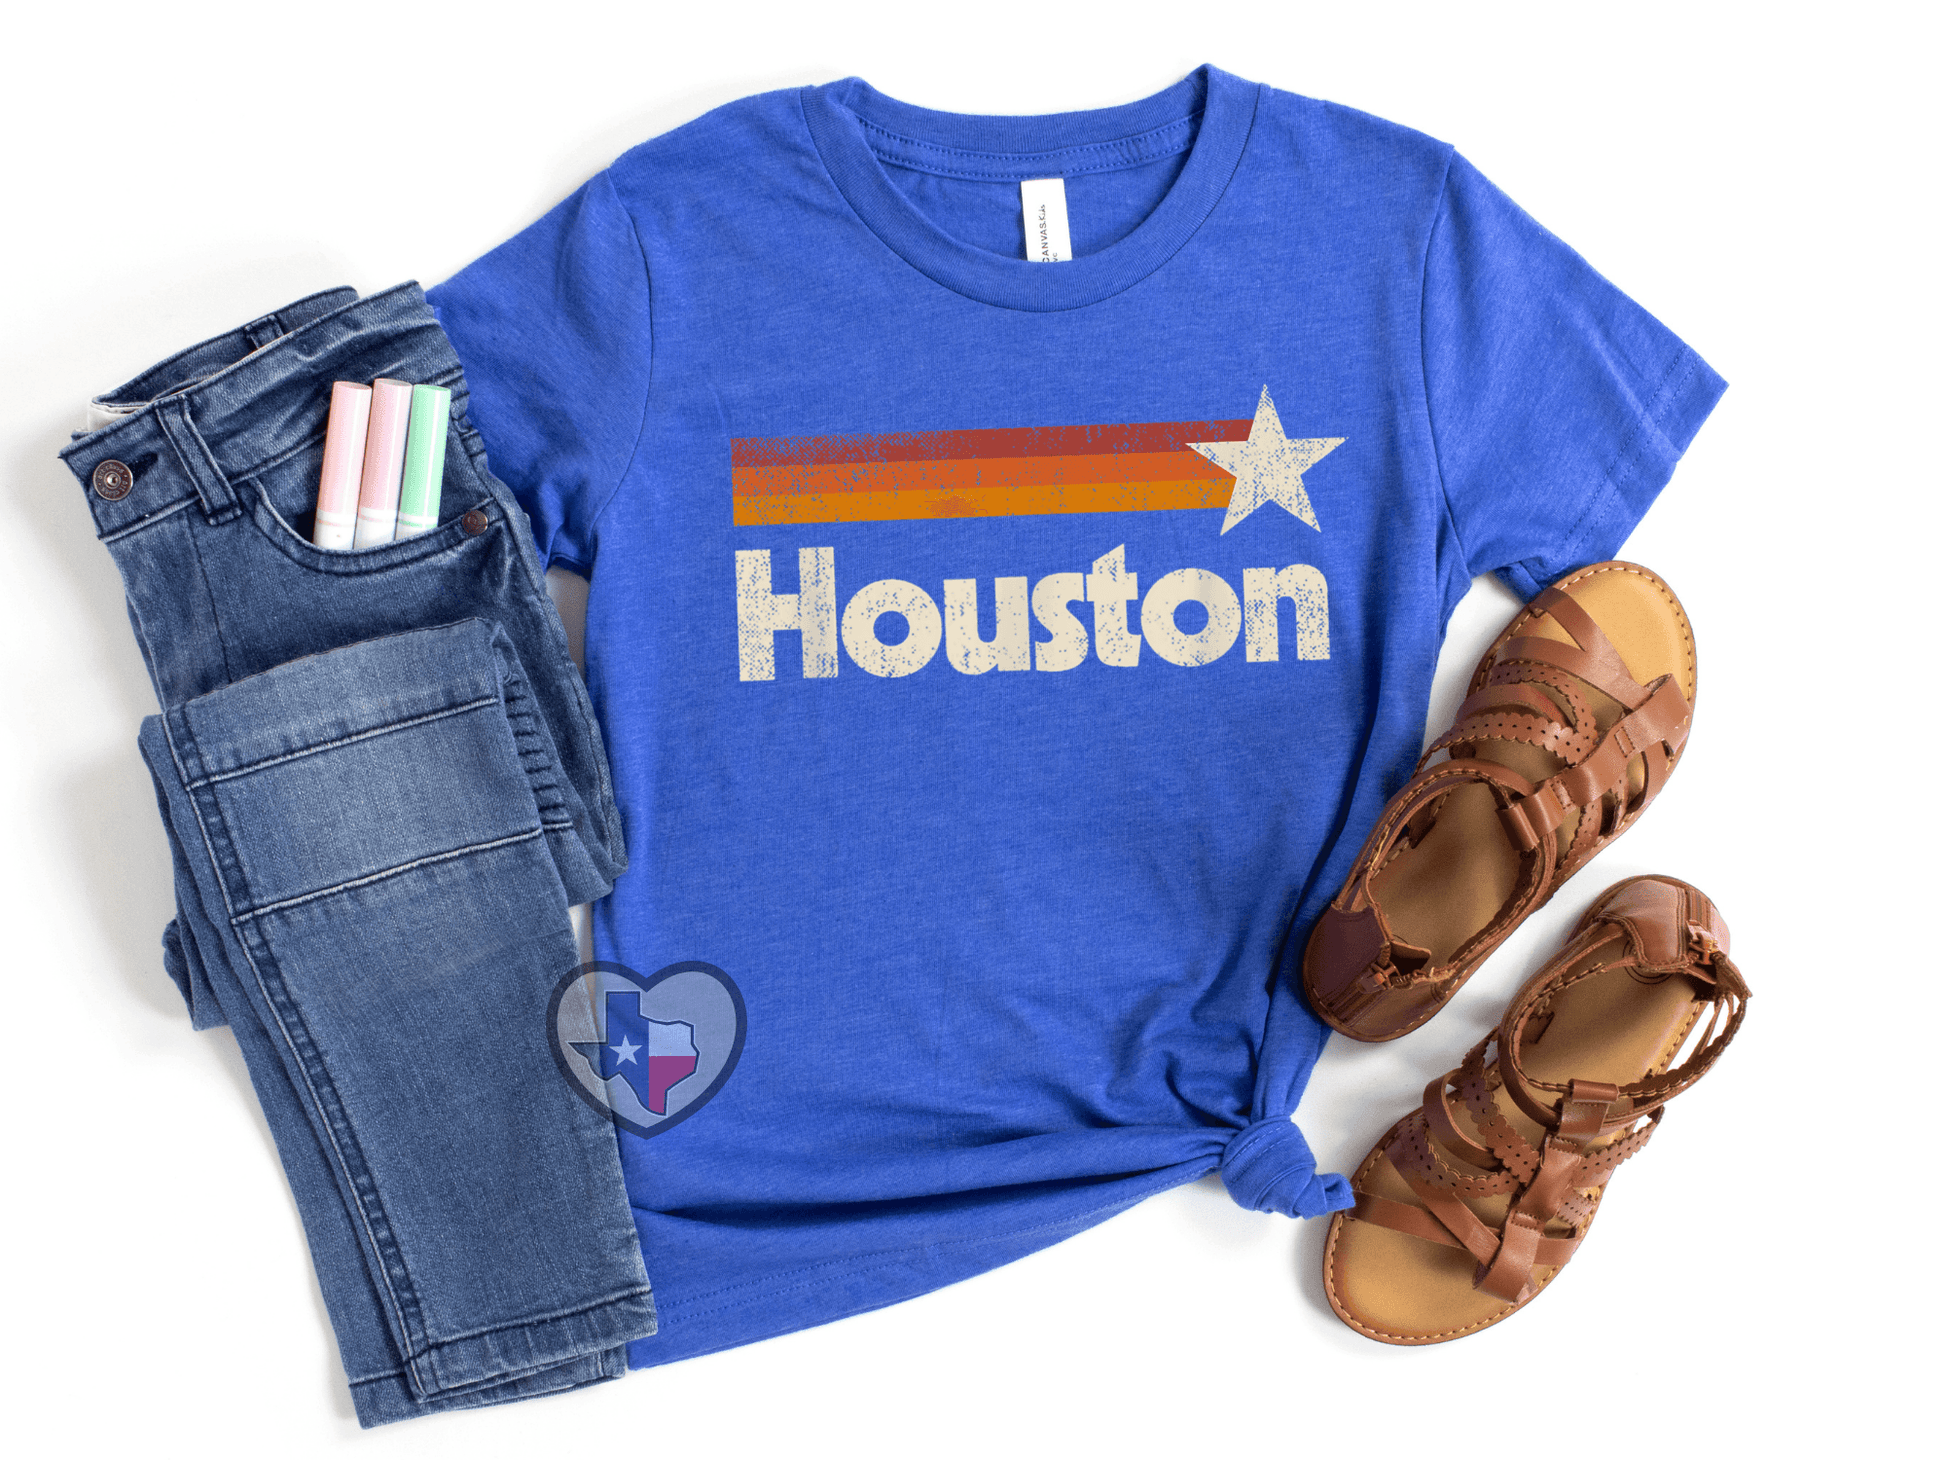 Retro Houston YOUTH - Texas Transfers and Designs